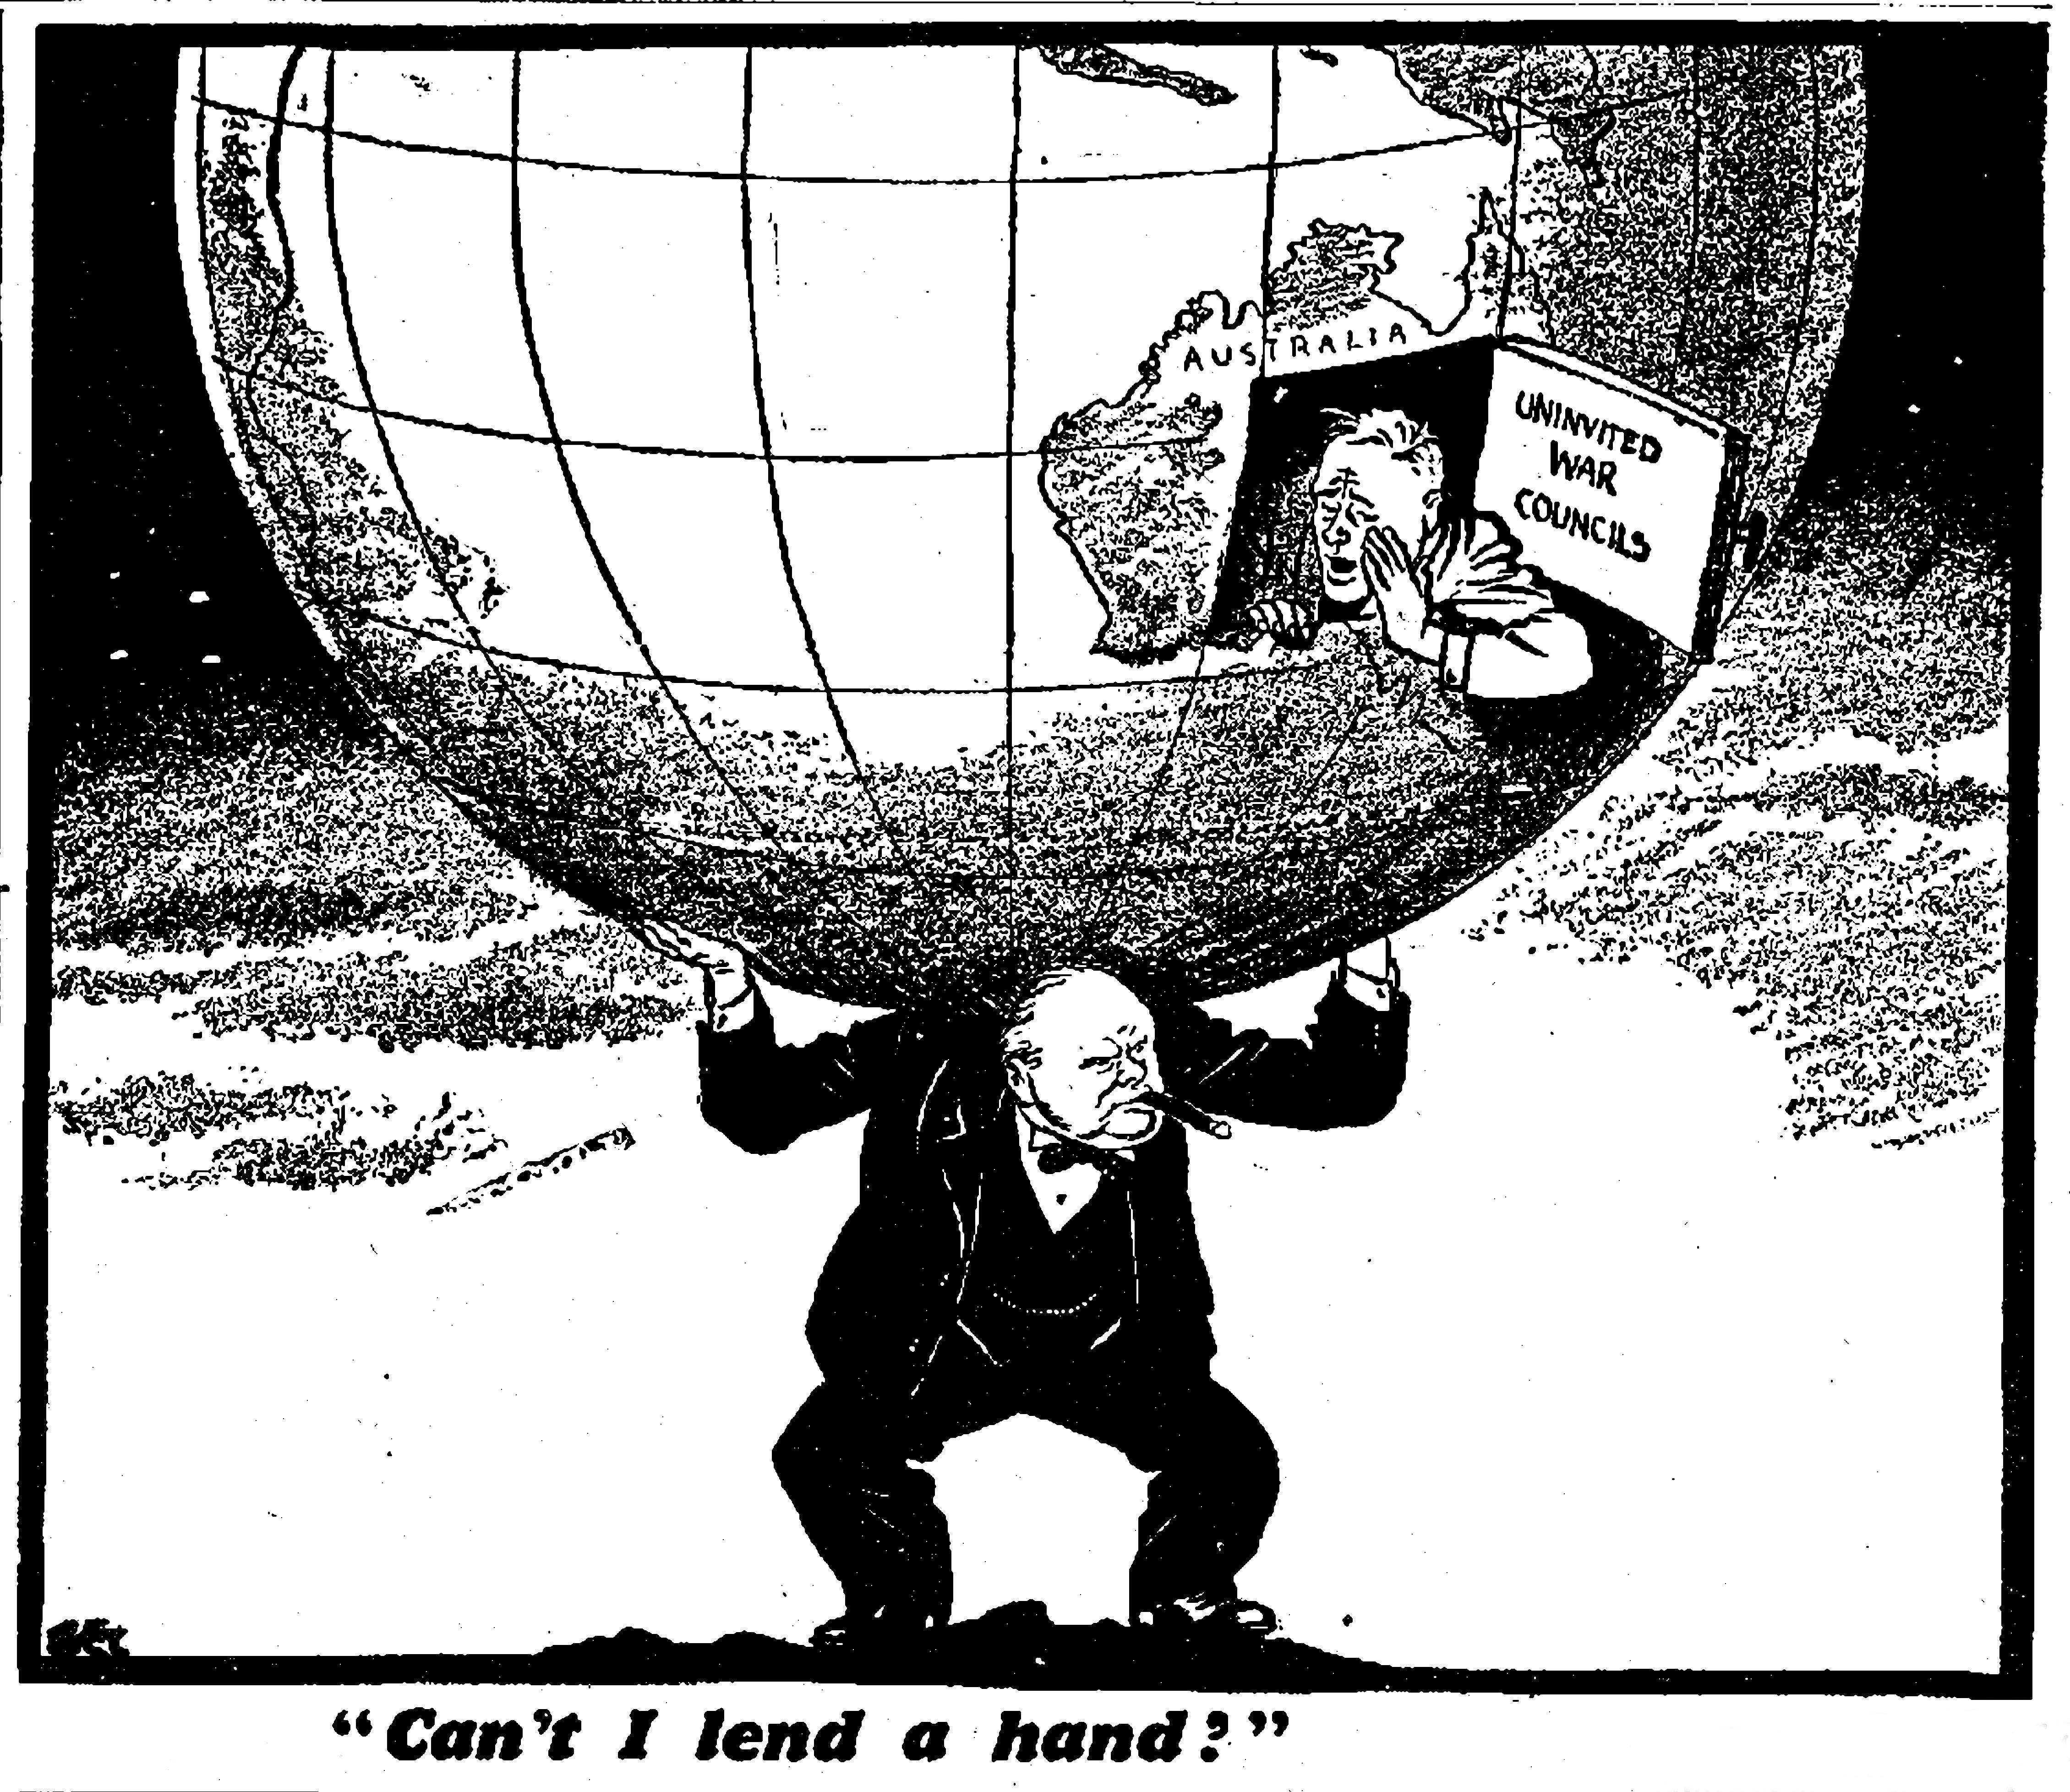 ‘Can I Lend a Hand?’ Daily Mirror, 3 January 1942 by Philip Zec